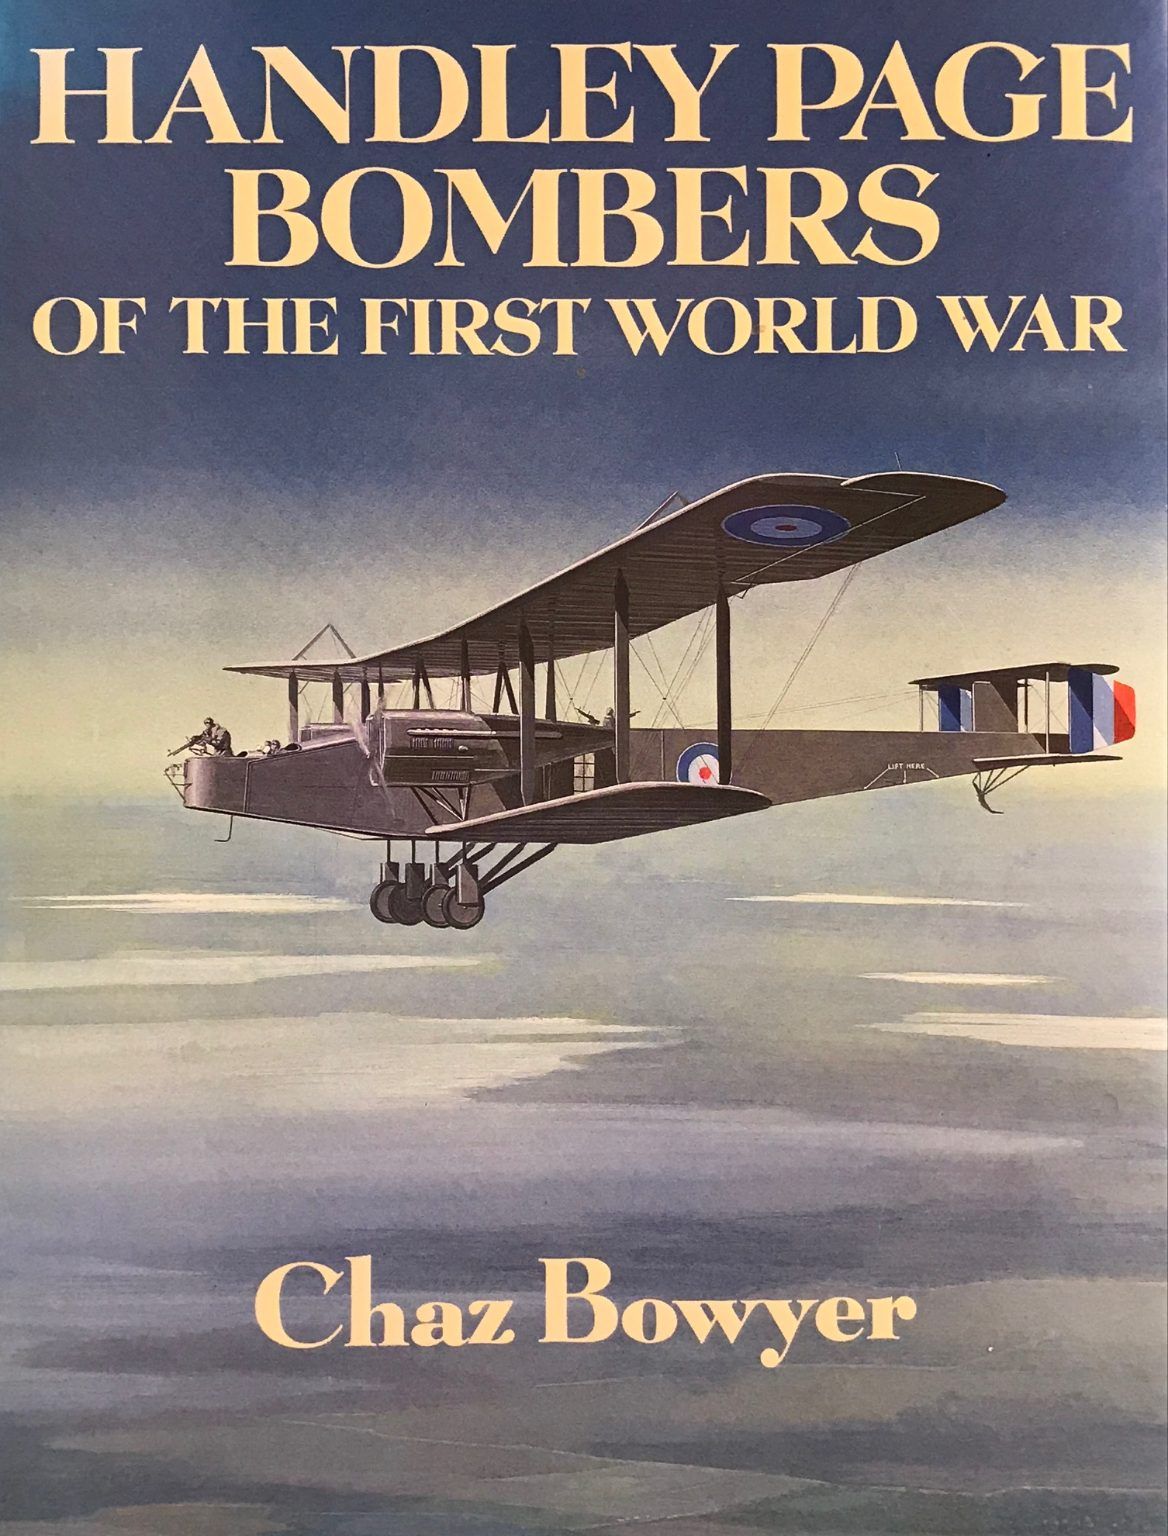 HANDLEY PAGE BOMBERS: of the First World War